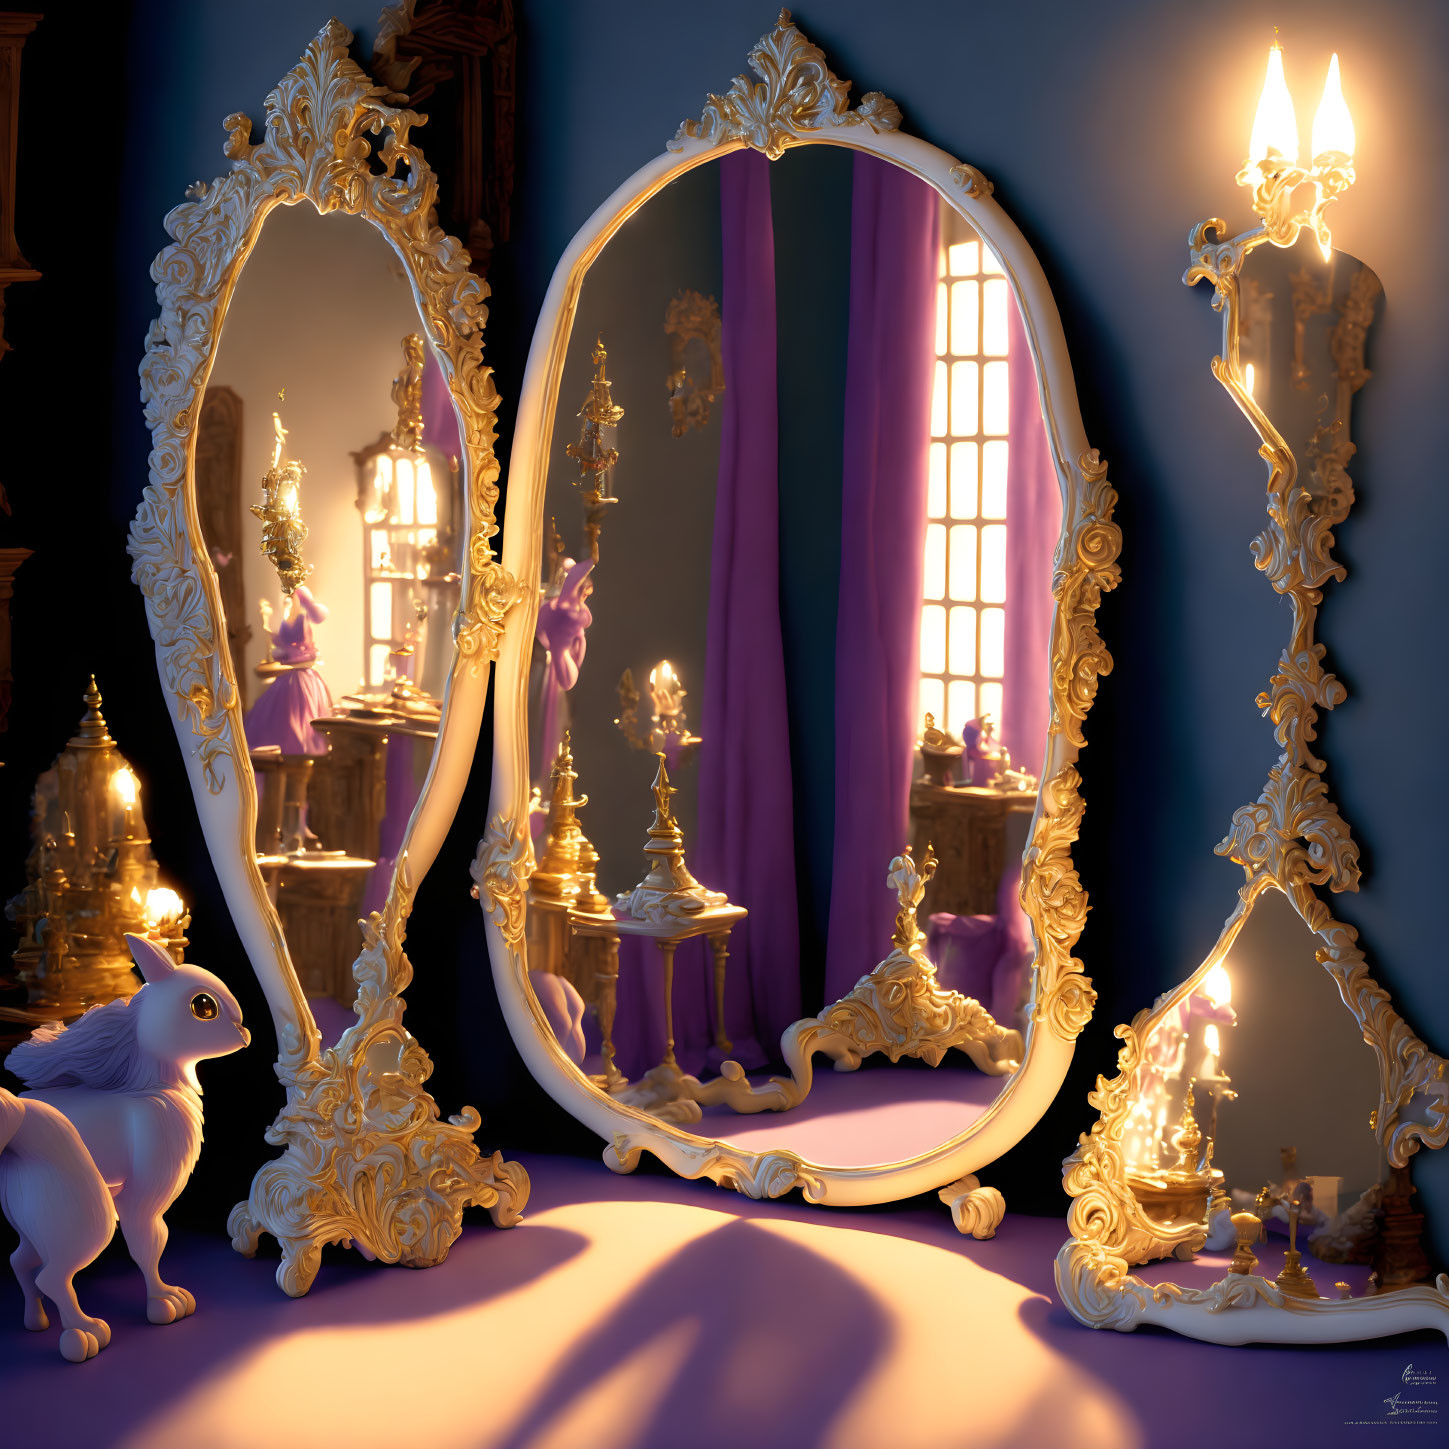 Golden-framed mirror reflecting opulent room with purple drapes and unicorn figure